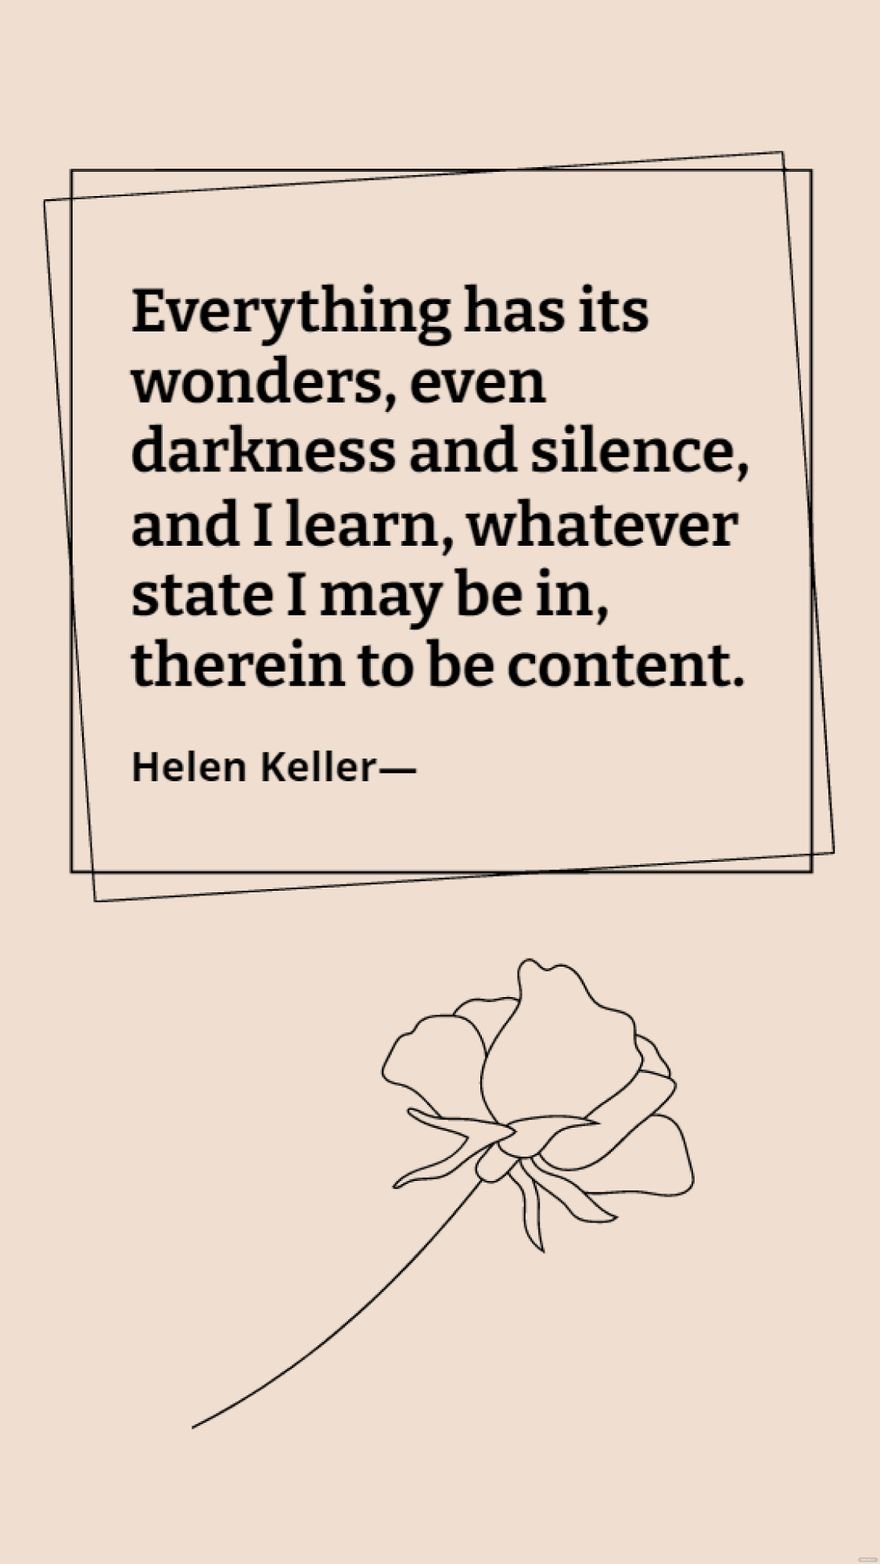 Helen Keller - Everything has its wonders, even darkness and silence, and I learn, whatever state I may be in, therein to be content.